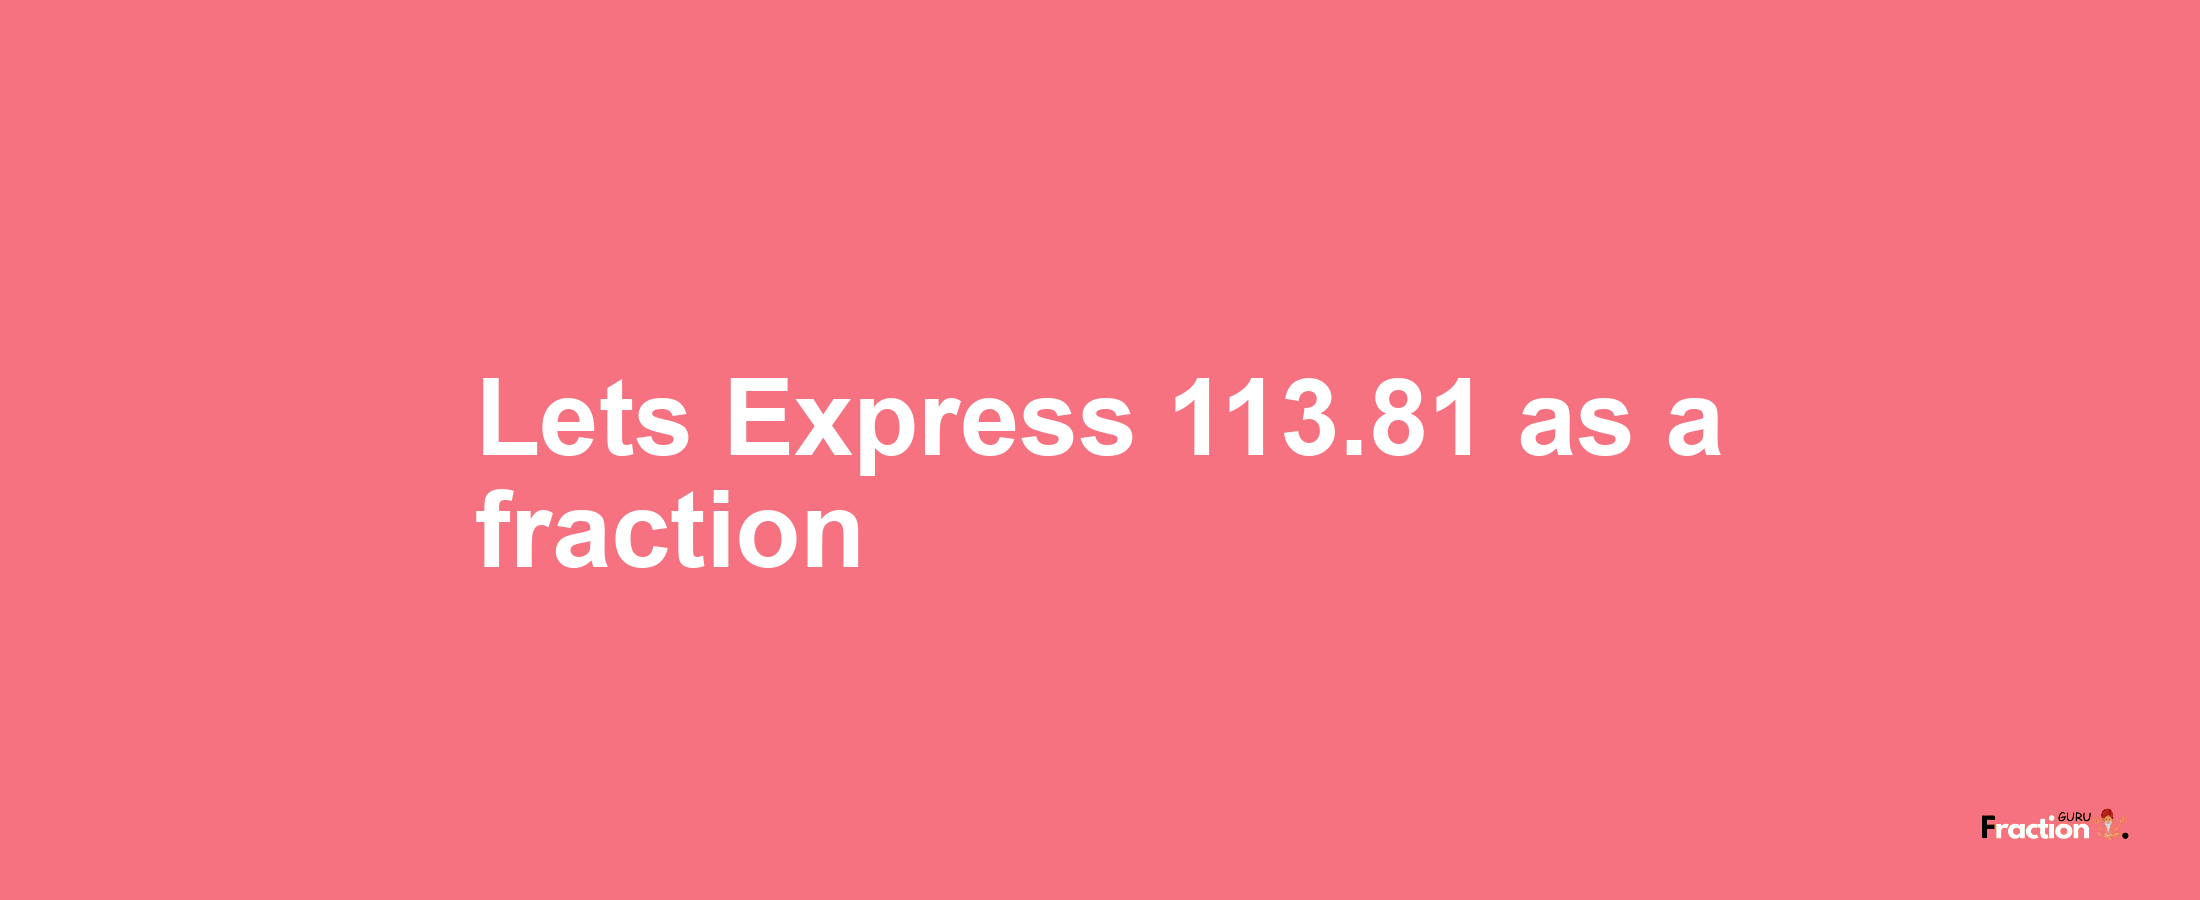 Lets Express 113.81 as afraction